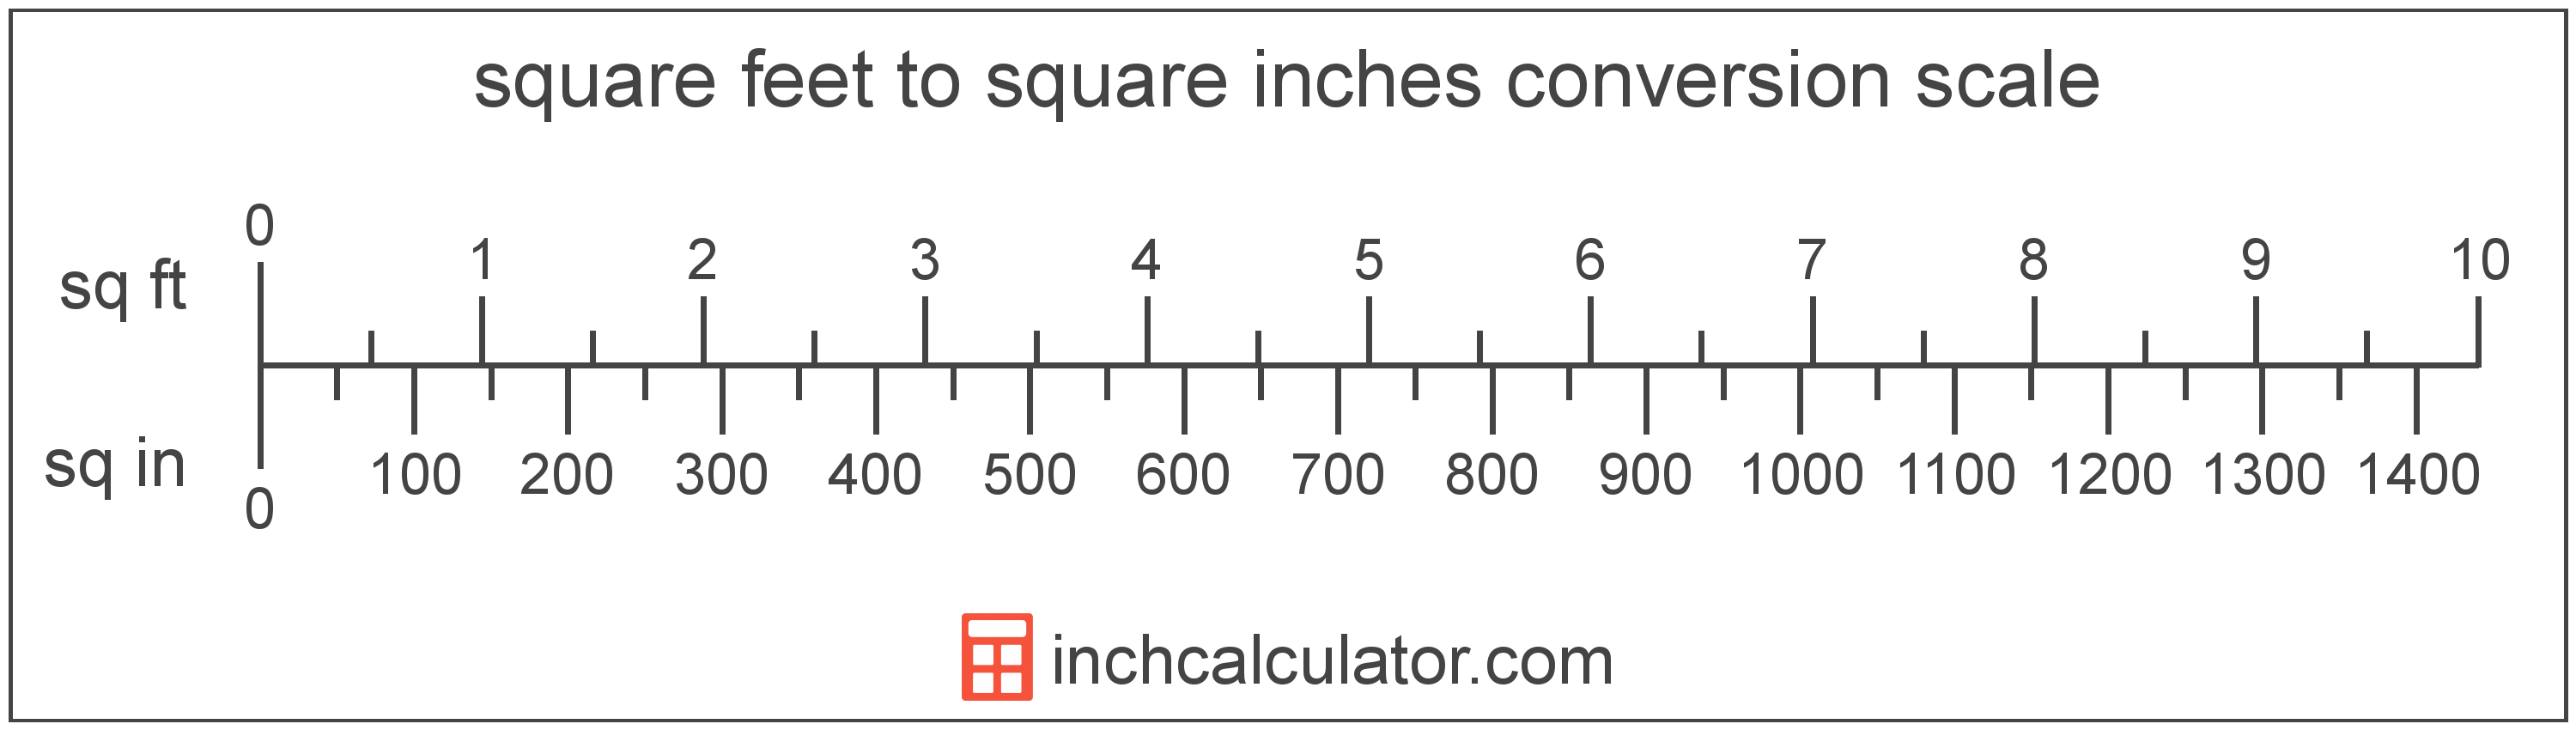 Square Feet To M2 Square Feet to Square Inches Conversion (sq ft to sq in)